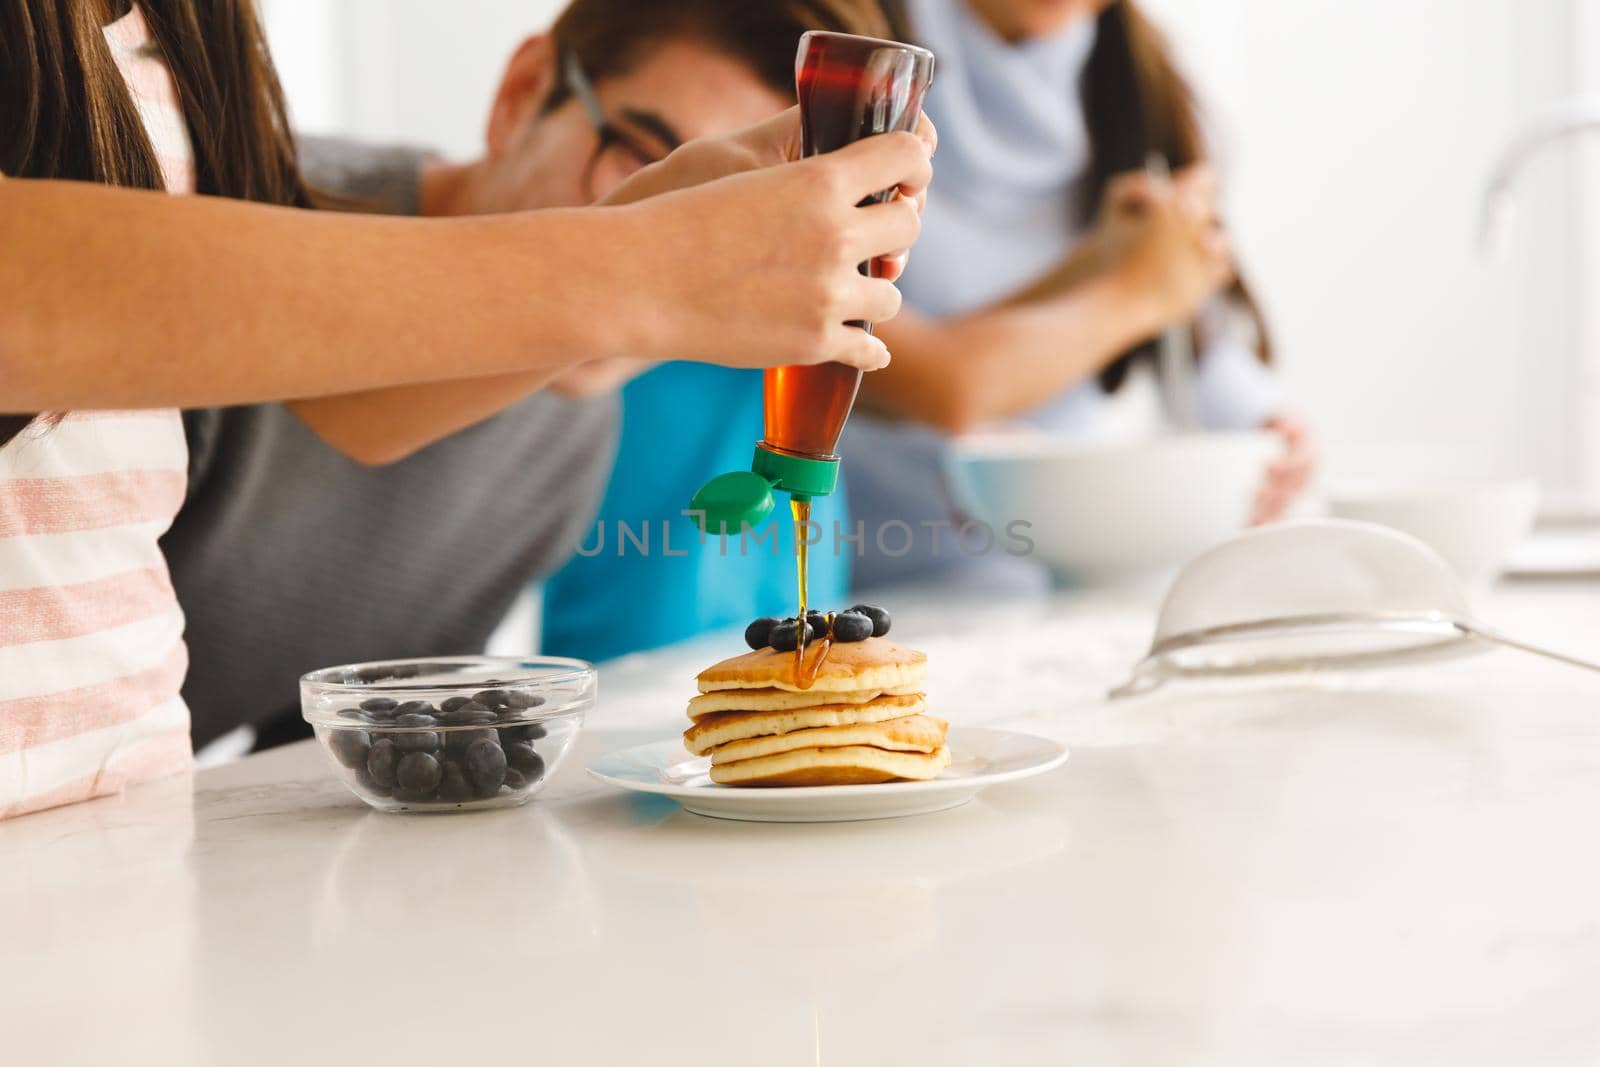 Asian family preparing breakfast in kitchen,father watching daughter put syrup on pancakes by Wavebreakmedia